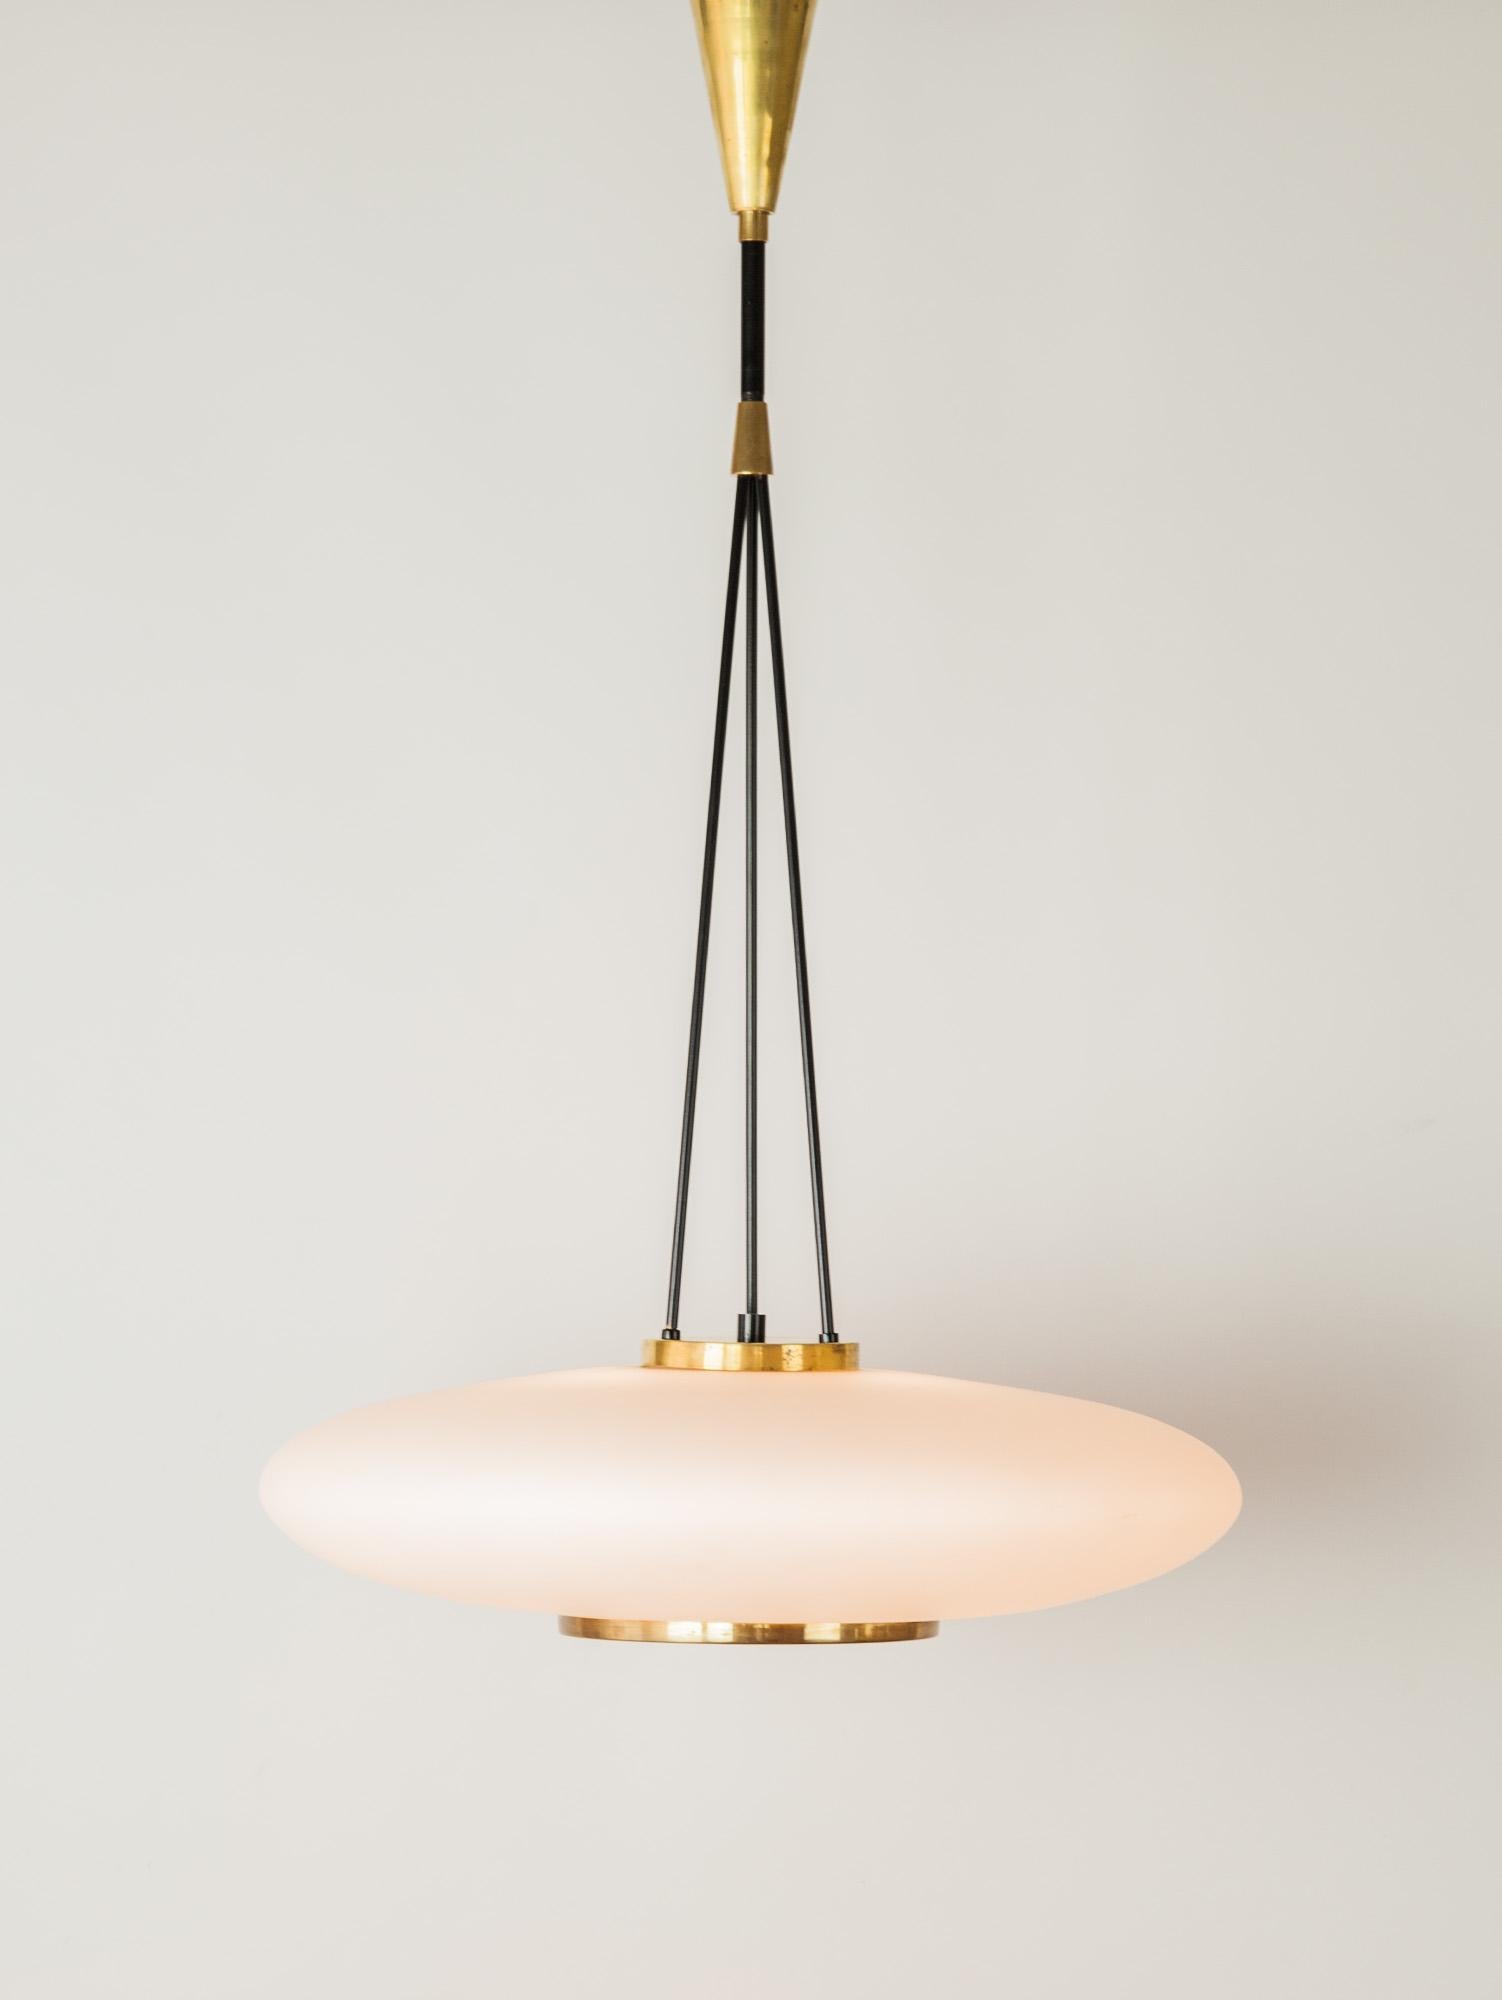 Rare and stunning Stilnovo modernist pendant with a glass shade and black and brass details. The round milky-white glass shade emits a lovely soft light and holds three E14 light bulbs. Lovely brass details are paired with the black enameled